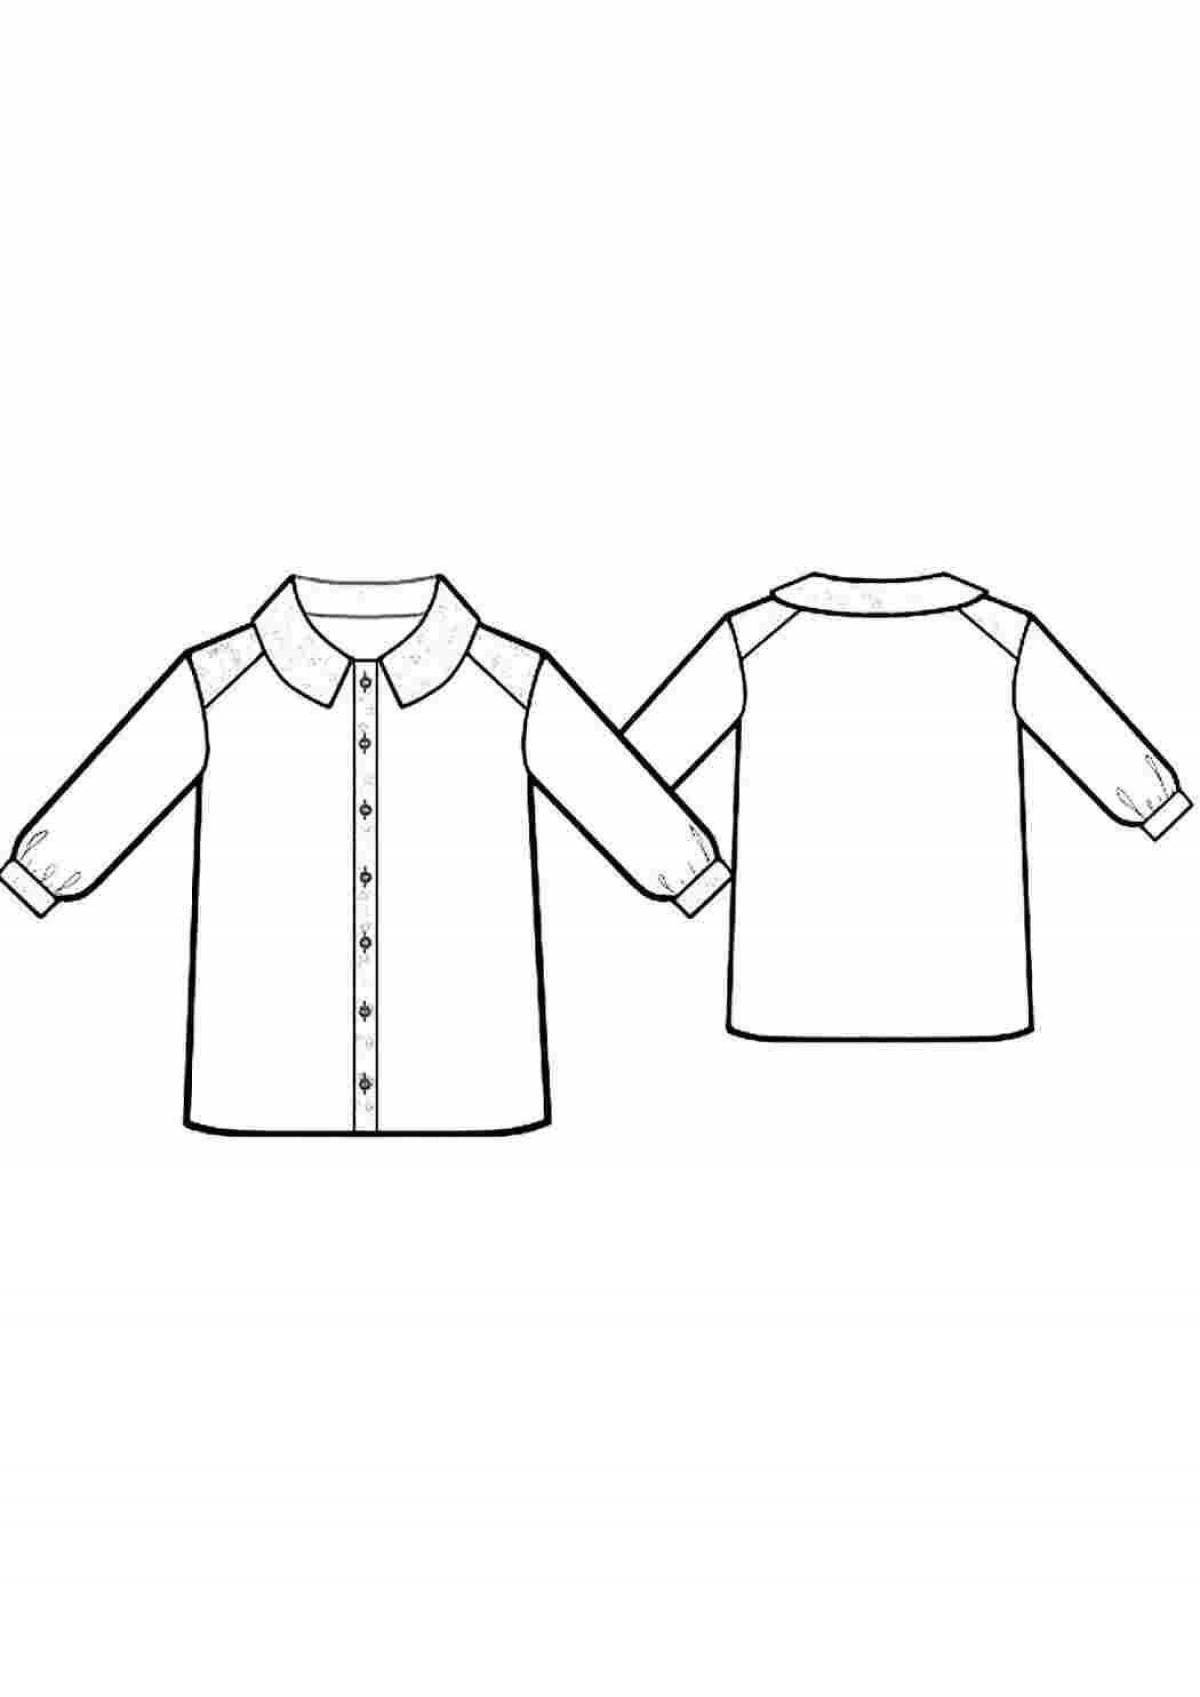 Creative coloring with shirts for 3-4 year olds